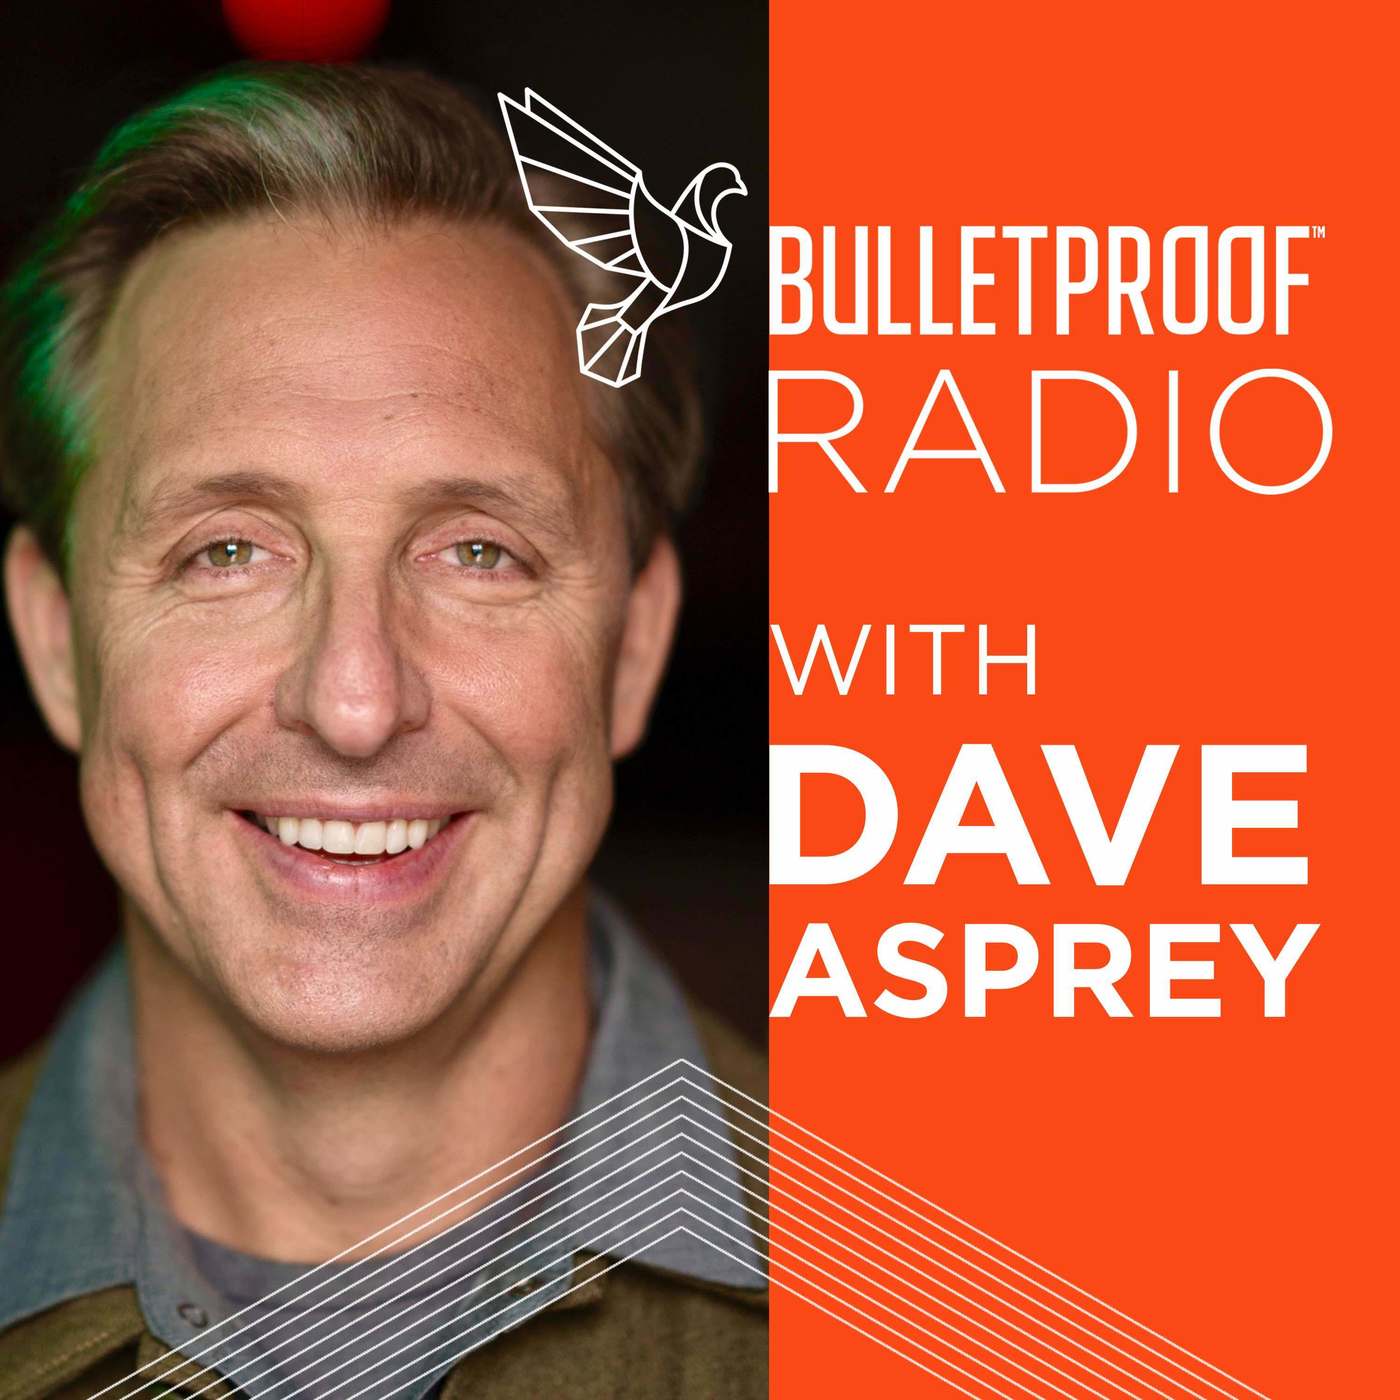 Think You Know Good Fats from Bad? 8 Oils to Avoid – Dr. Cate Shanahan with Dave Asprey